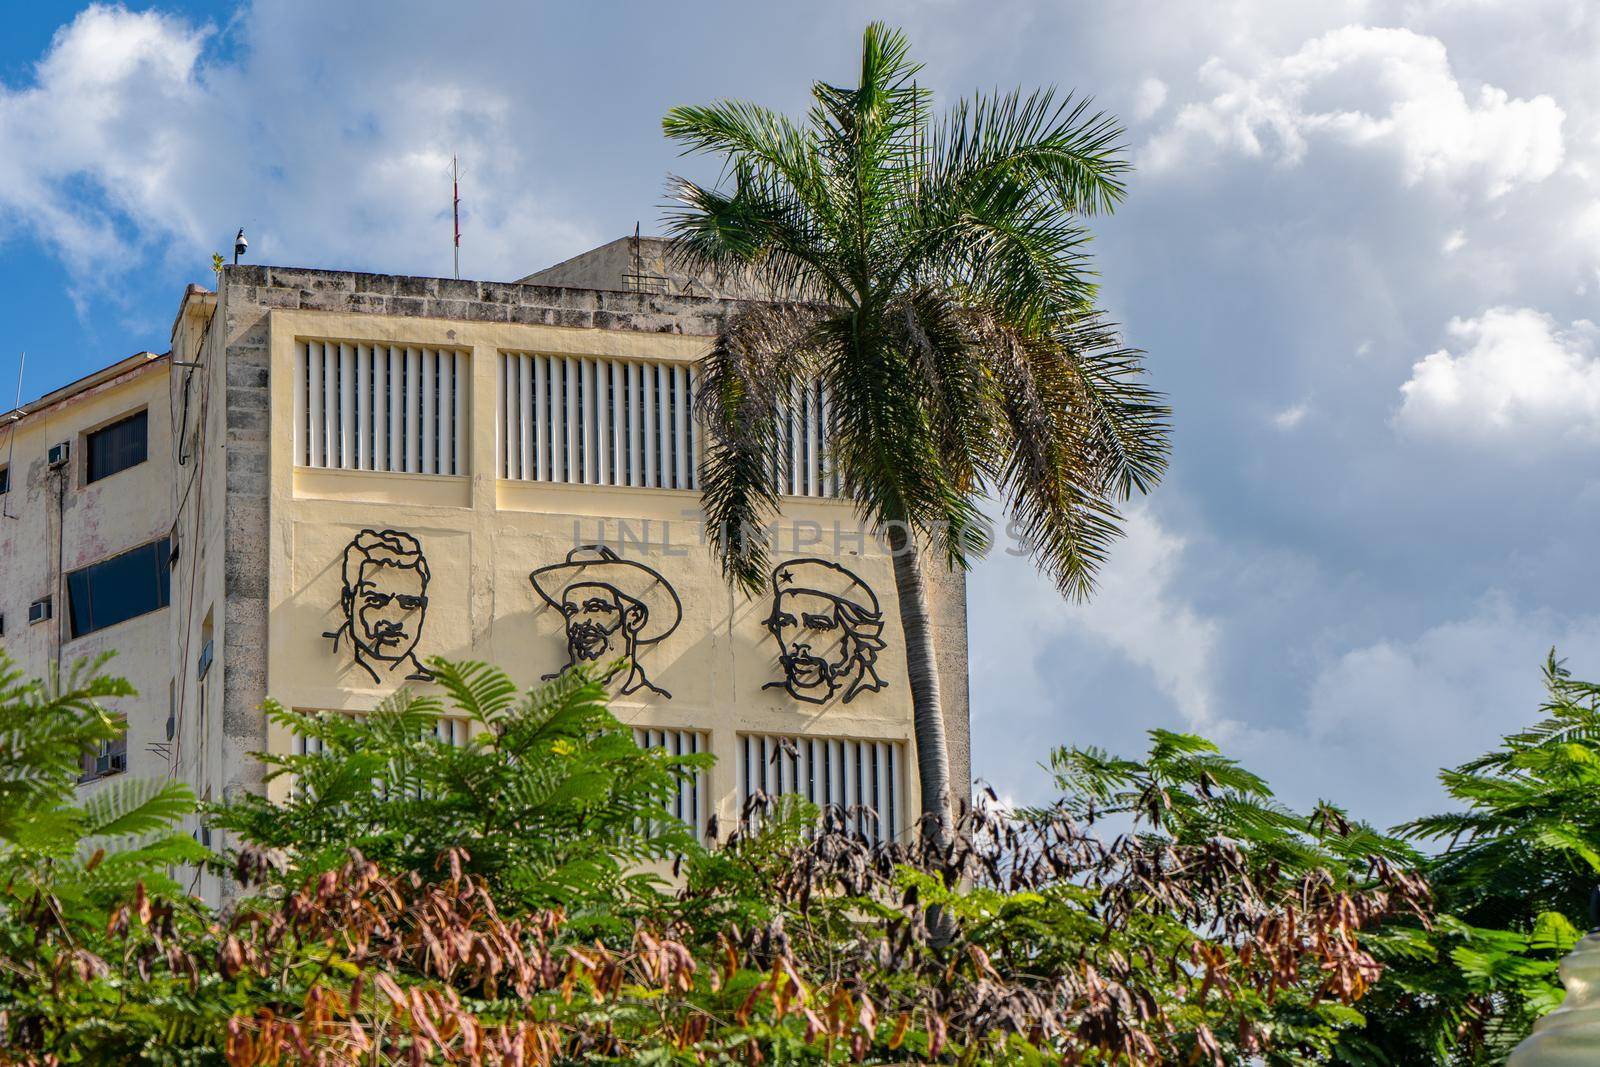 Havana Cuba. November 25, 2020: Image of Mella, Camilo and Che, on the facade of the building of the Union of Young Communists of Cuba